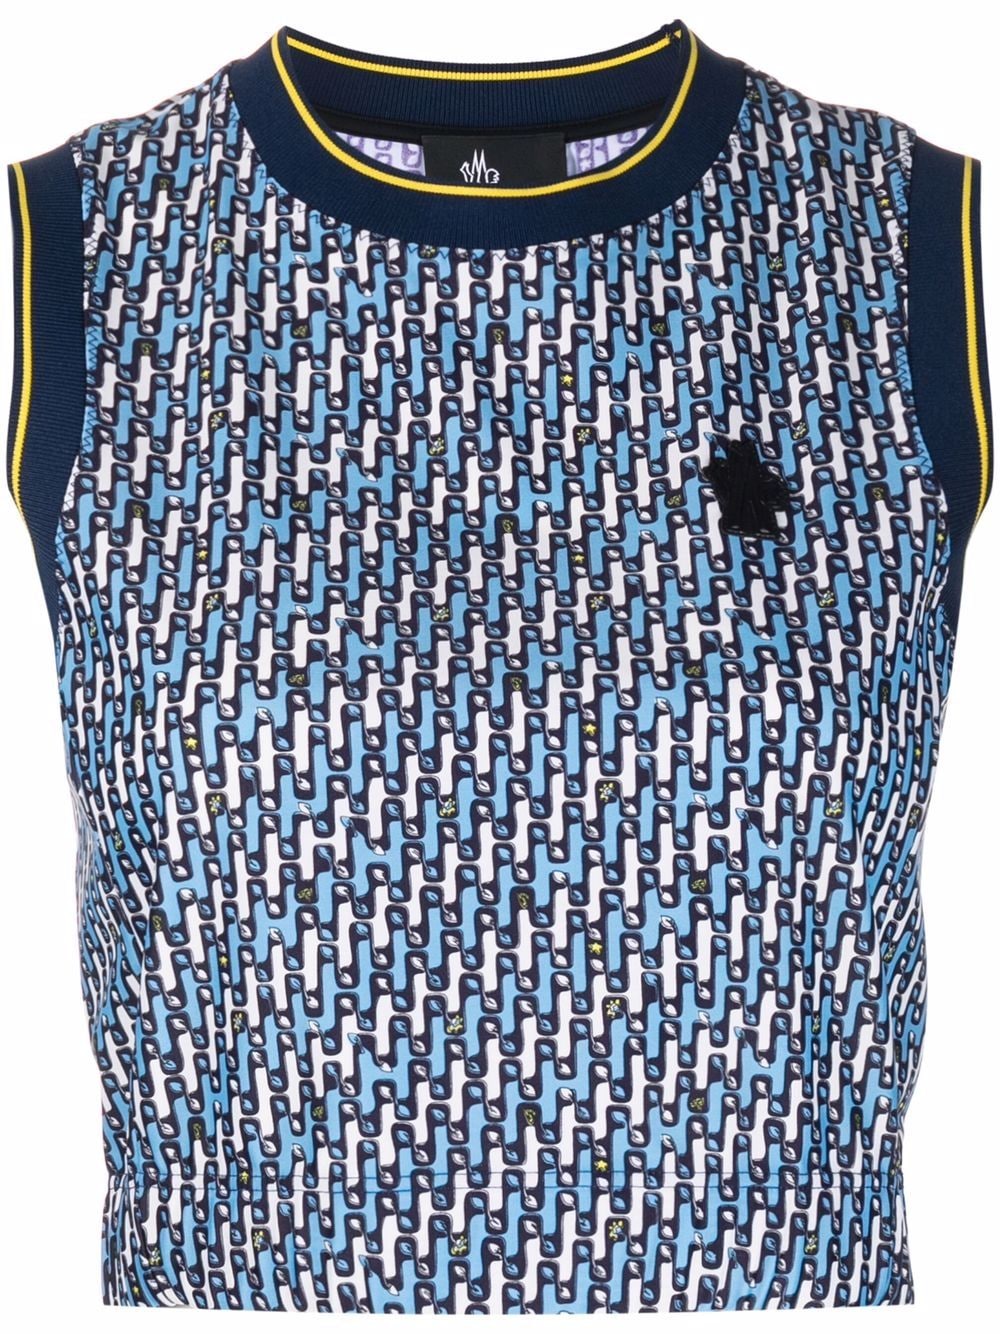 Moncler Grenoble abstract-pattern cropped tank top - Blue von Moncler Grenoble